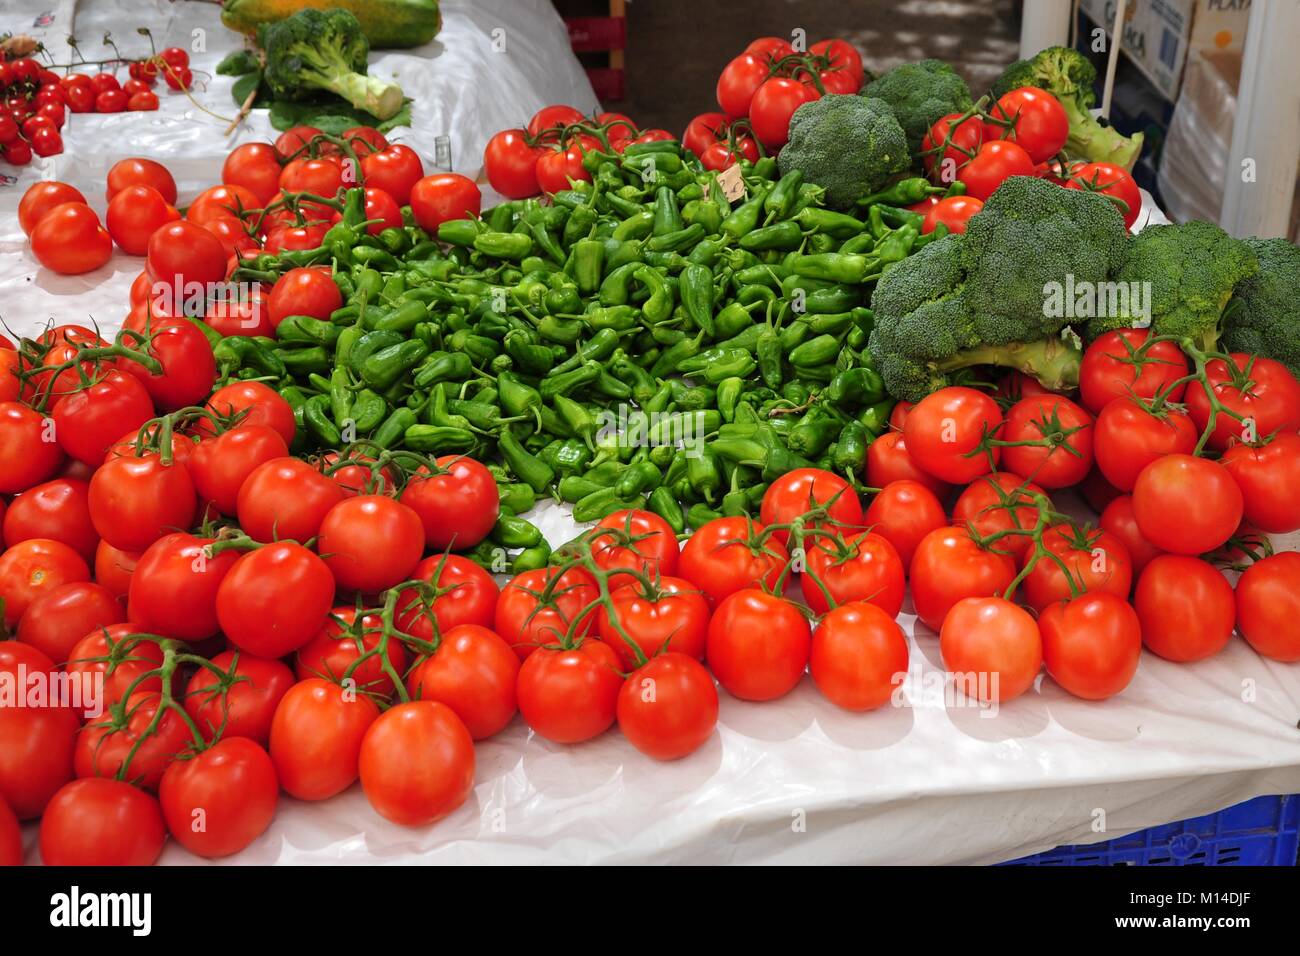 delicious arrangement of tomatoes and chillies on a Mediterranean market Stock Photo